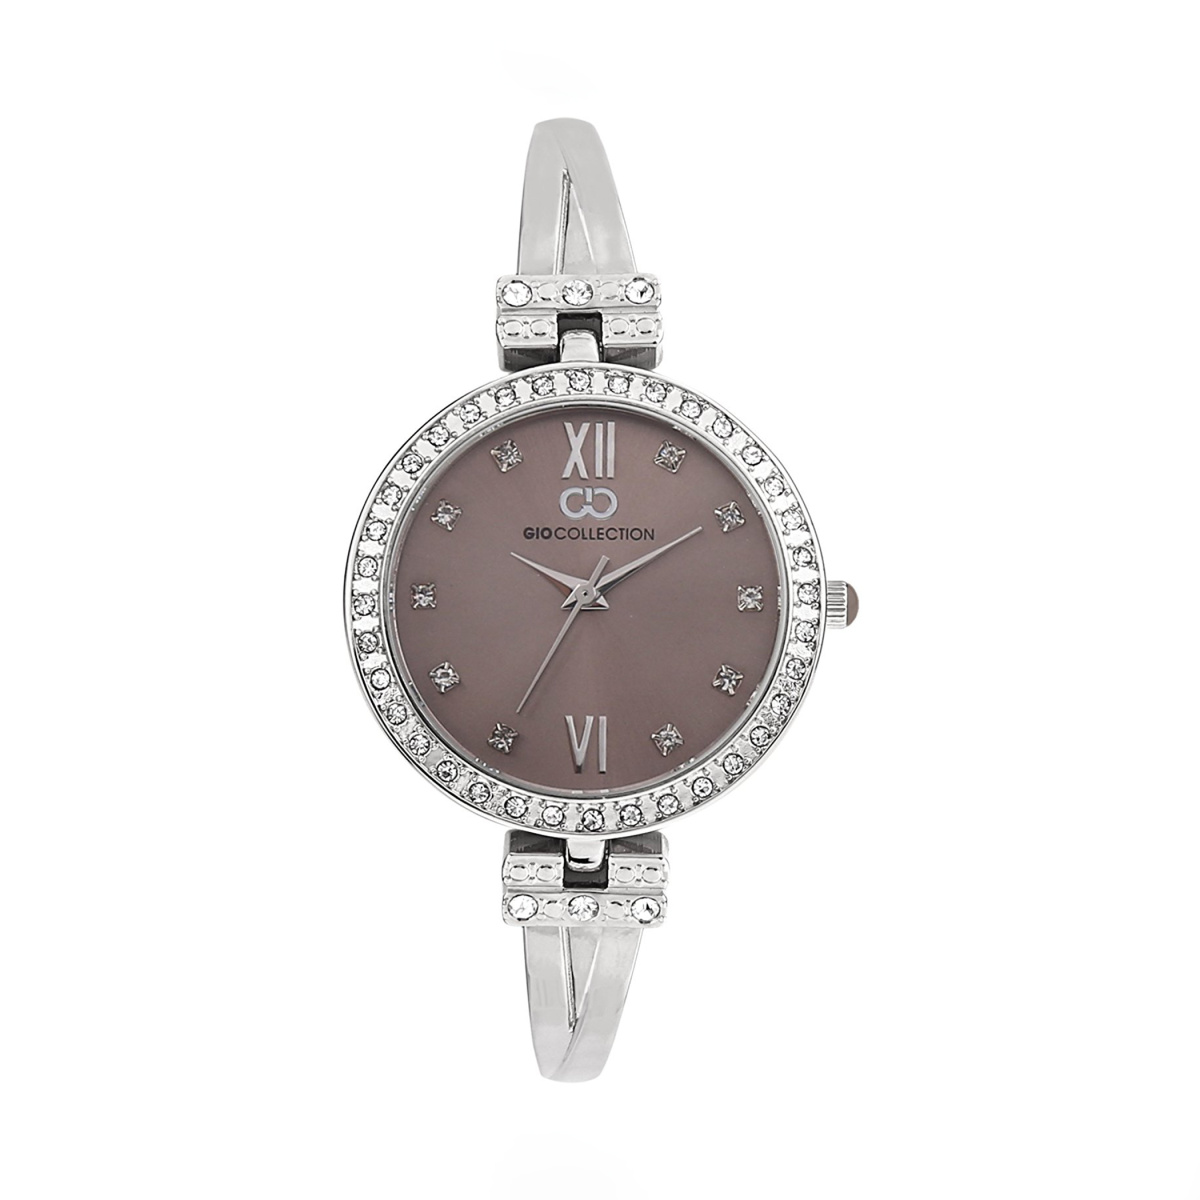 GIO COLLECTION Women Analog Watch- G2100-11